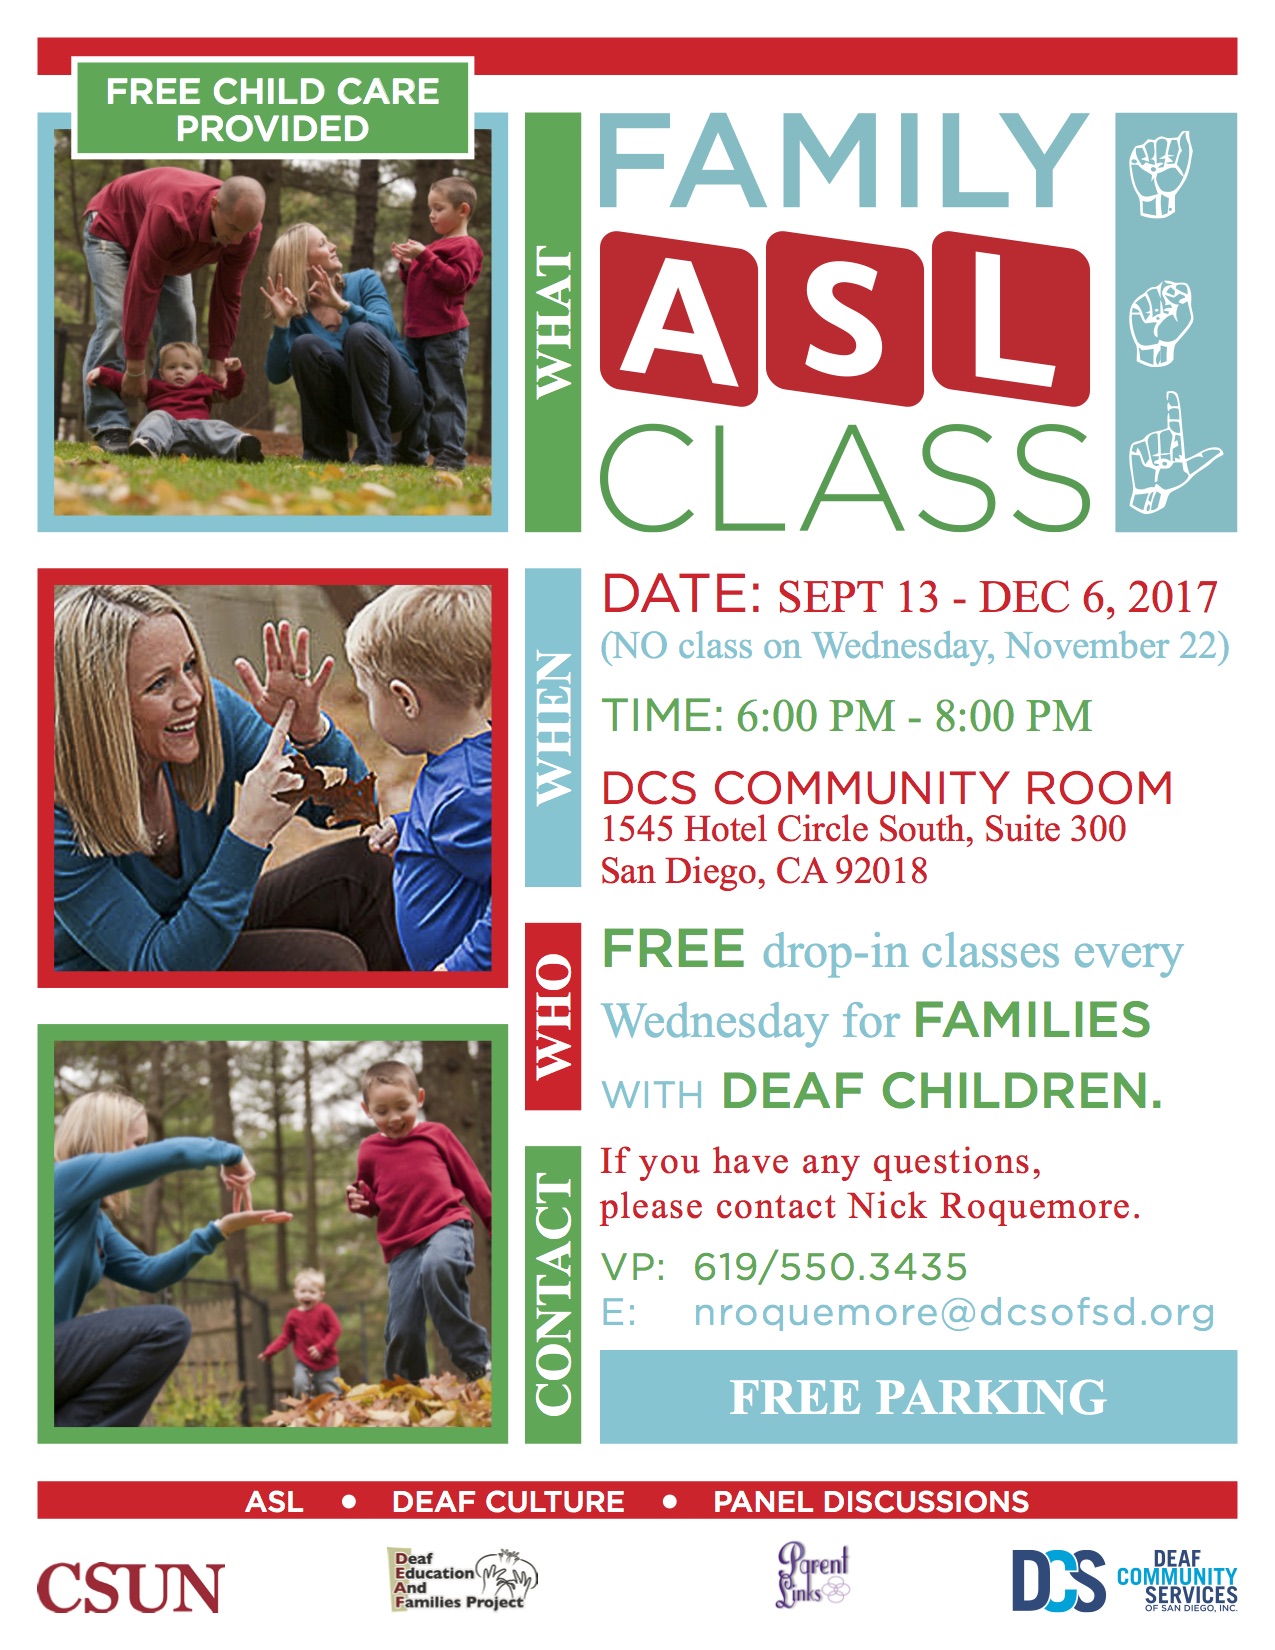 ASL Class for families